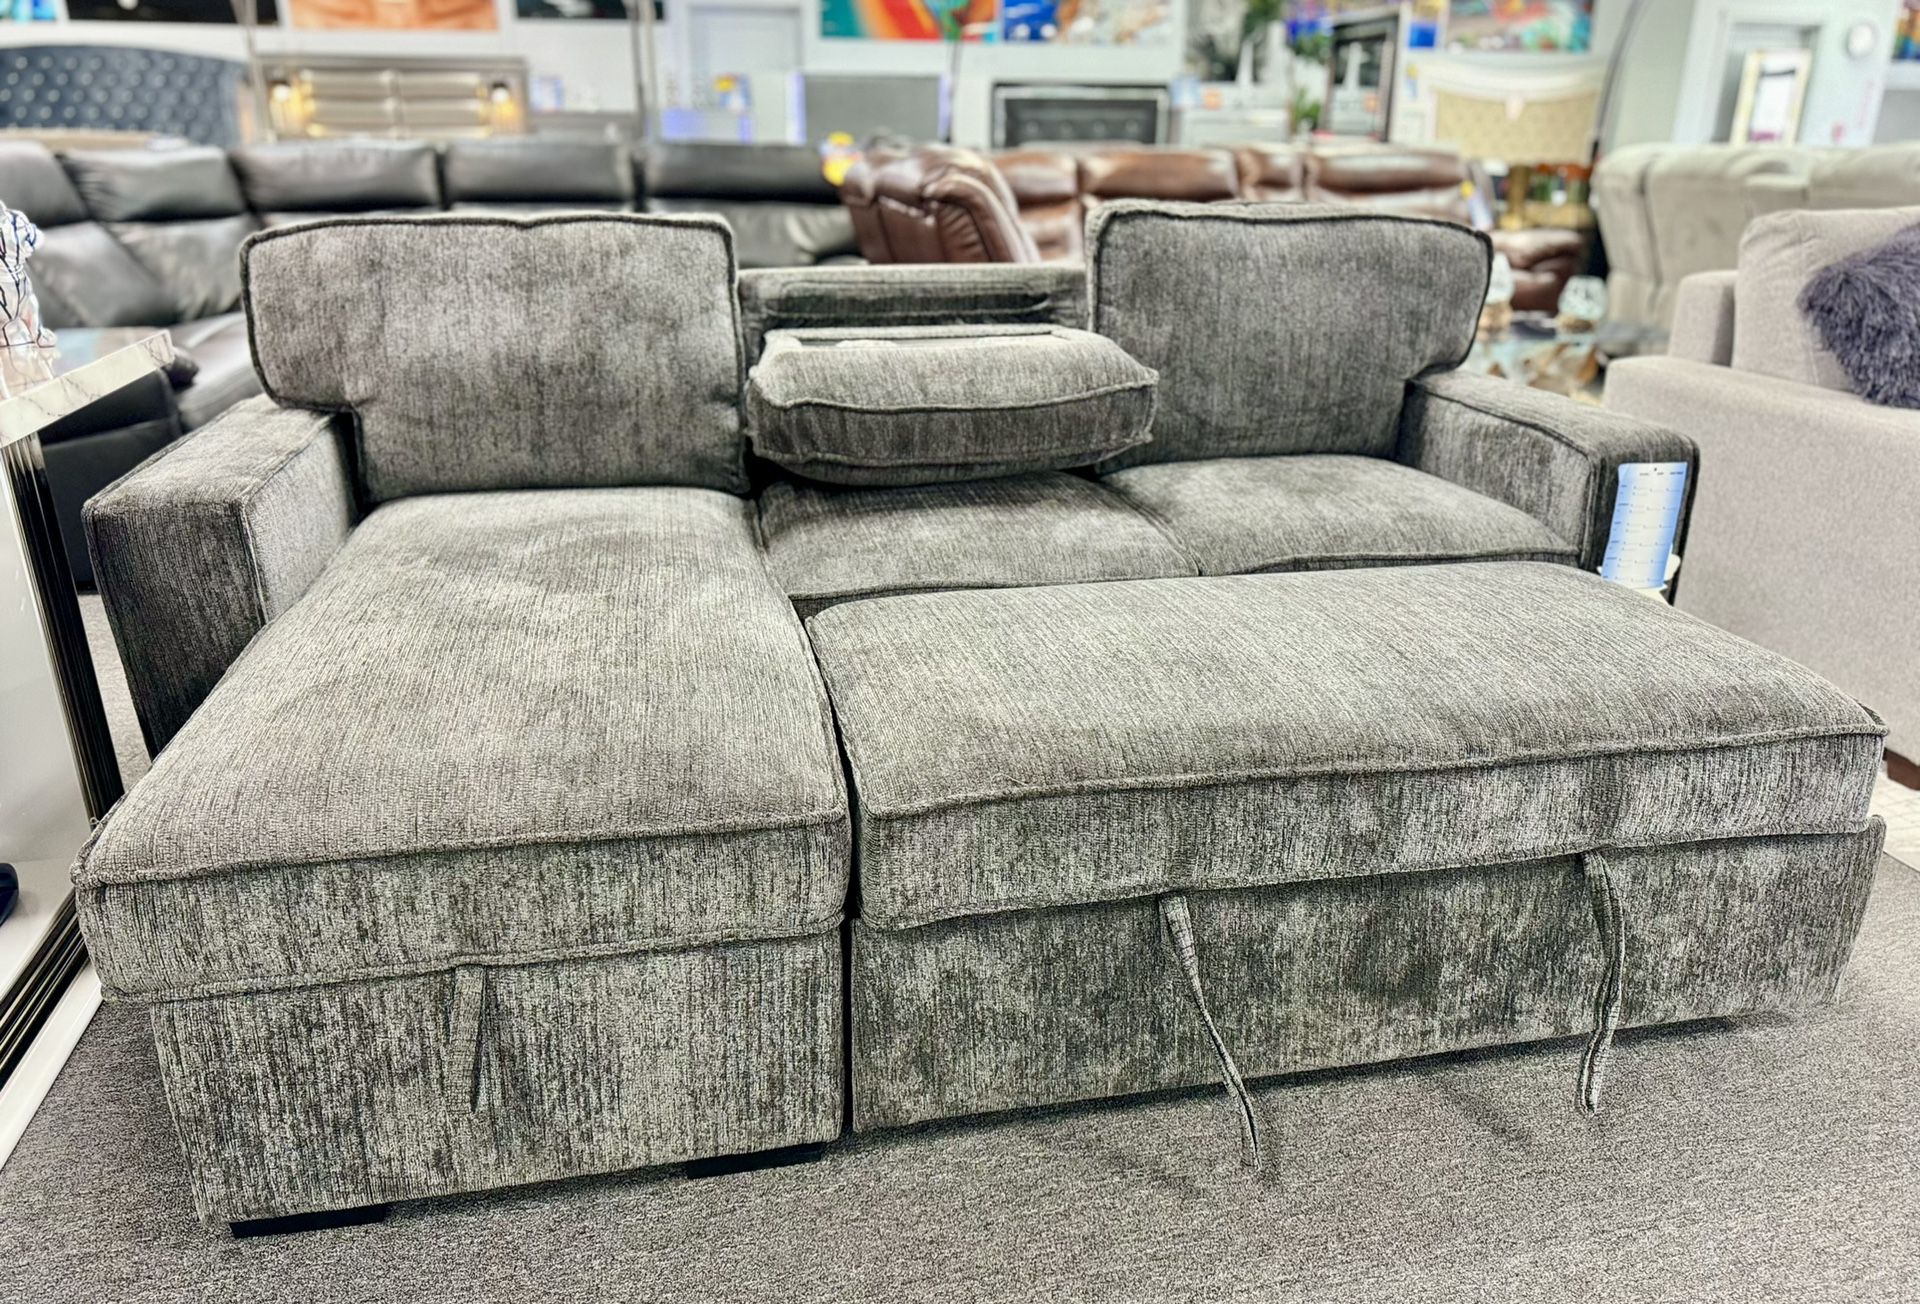 Crazy Weekend Deal😱Beautiful Grey Pull Out Sleeper Sectional On Sale Limited Time $599 (Huge Saving